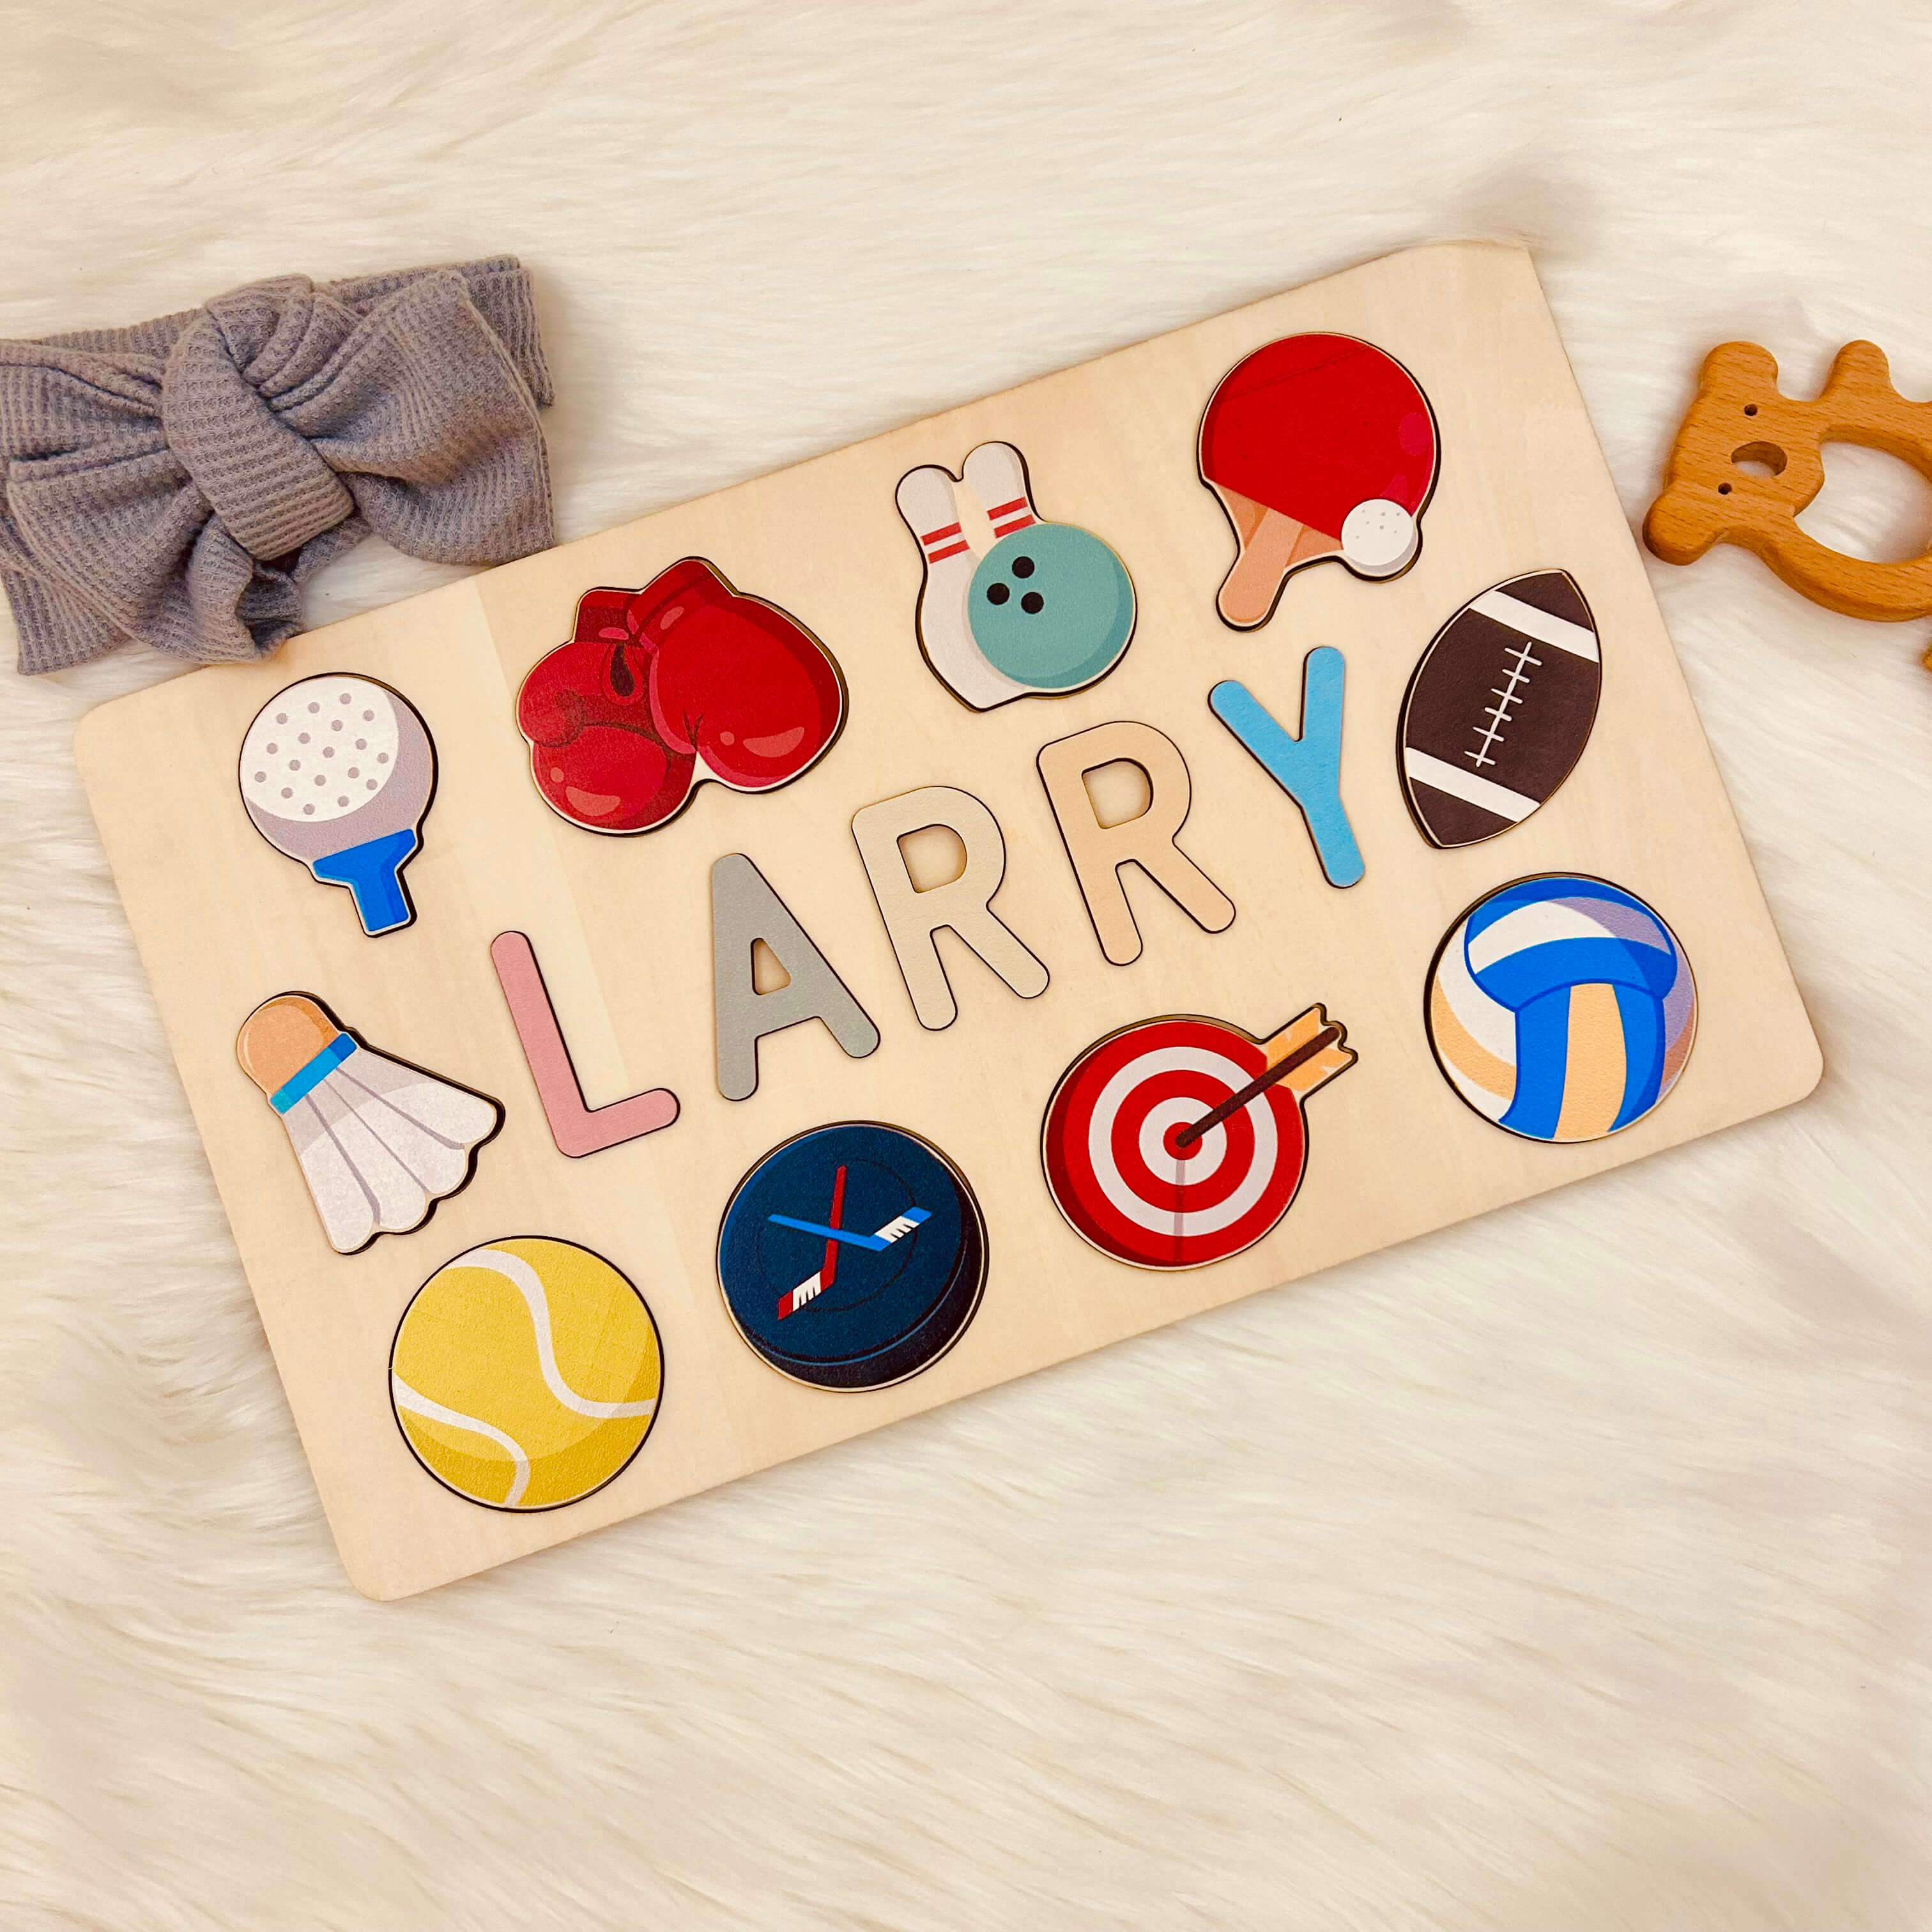 Personalized Wooden Baby Name Puzzle with Balls Product Name: Personalized Wooden Baby Name Puzzle with Balls Material: Eco-Friendly Plywood BasswoodLetters Available: Up to 10Engraving Messages: AvailableNon-Toxic: YesNon-Harmful: Yes Color: Pastel-boy;